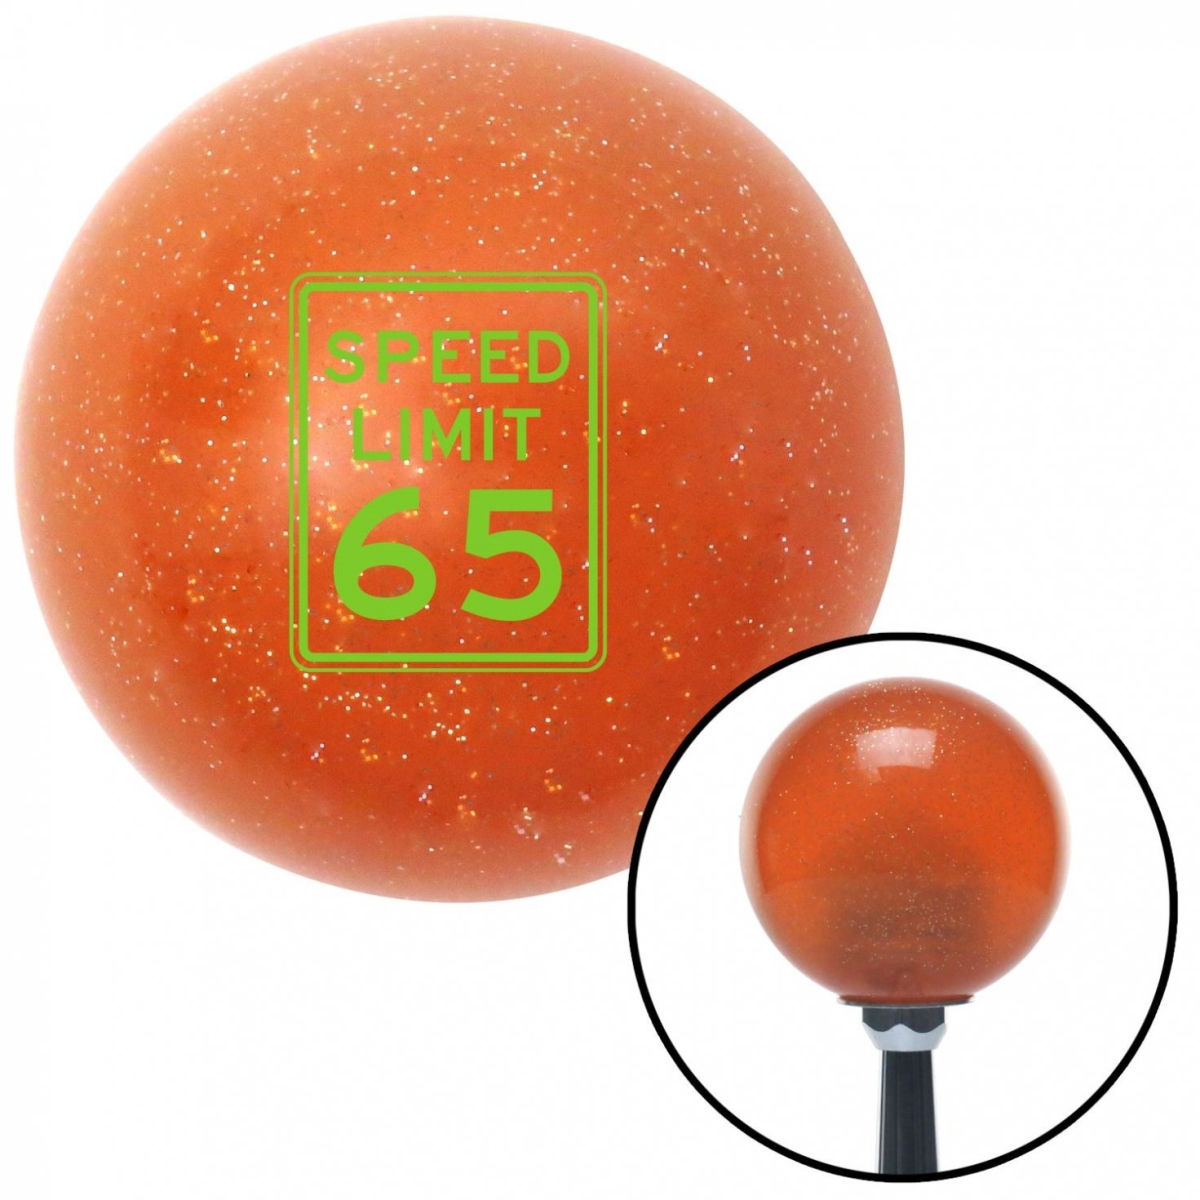 American Shifter 42834 Green Speed Limit 65 Orange Metal Flake Shift Knob with M16 x 1.5 Insert Shifter -  American Shifter Company